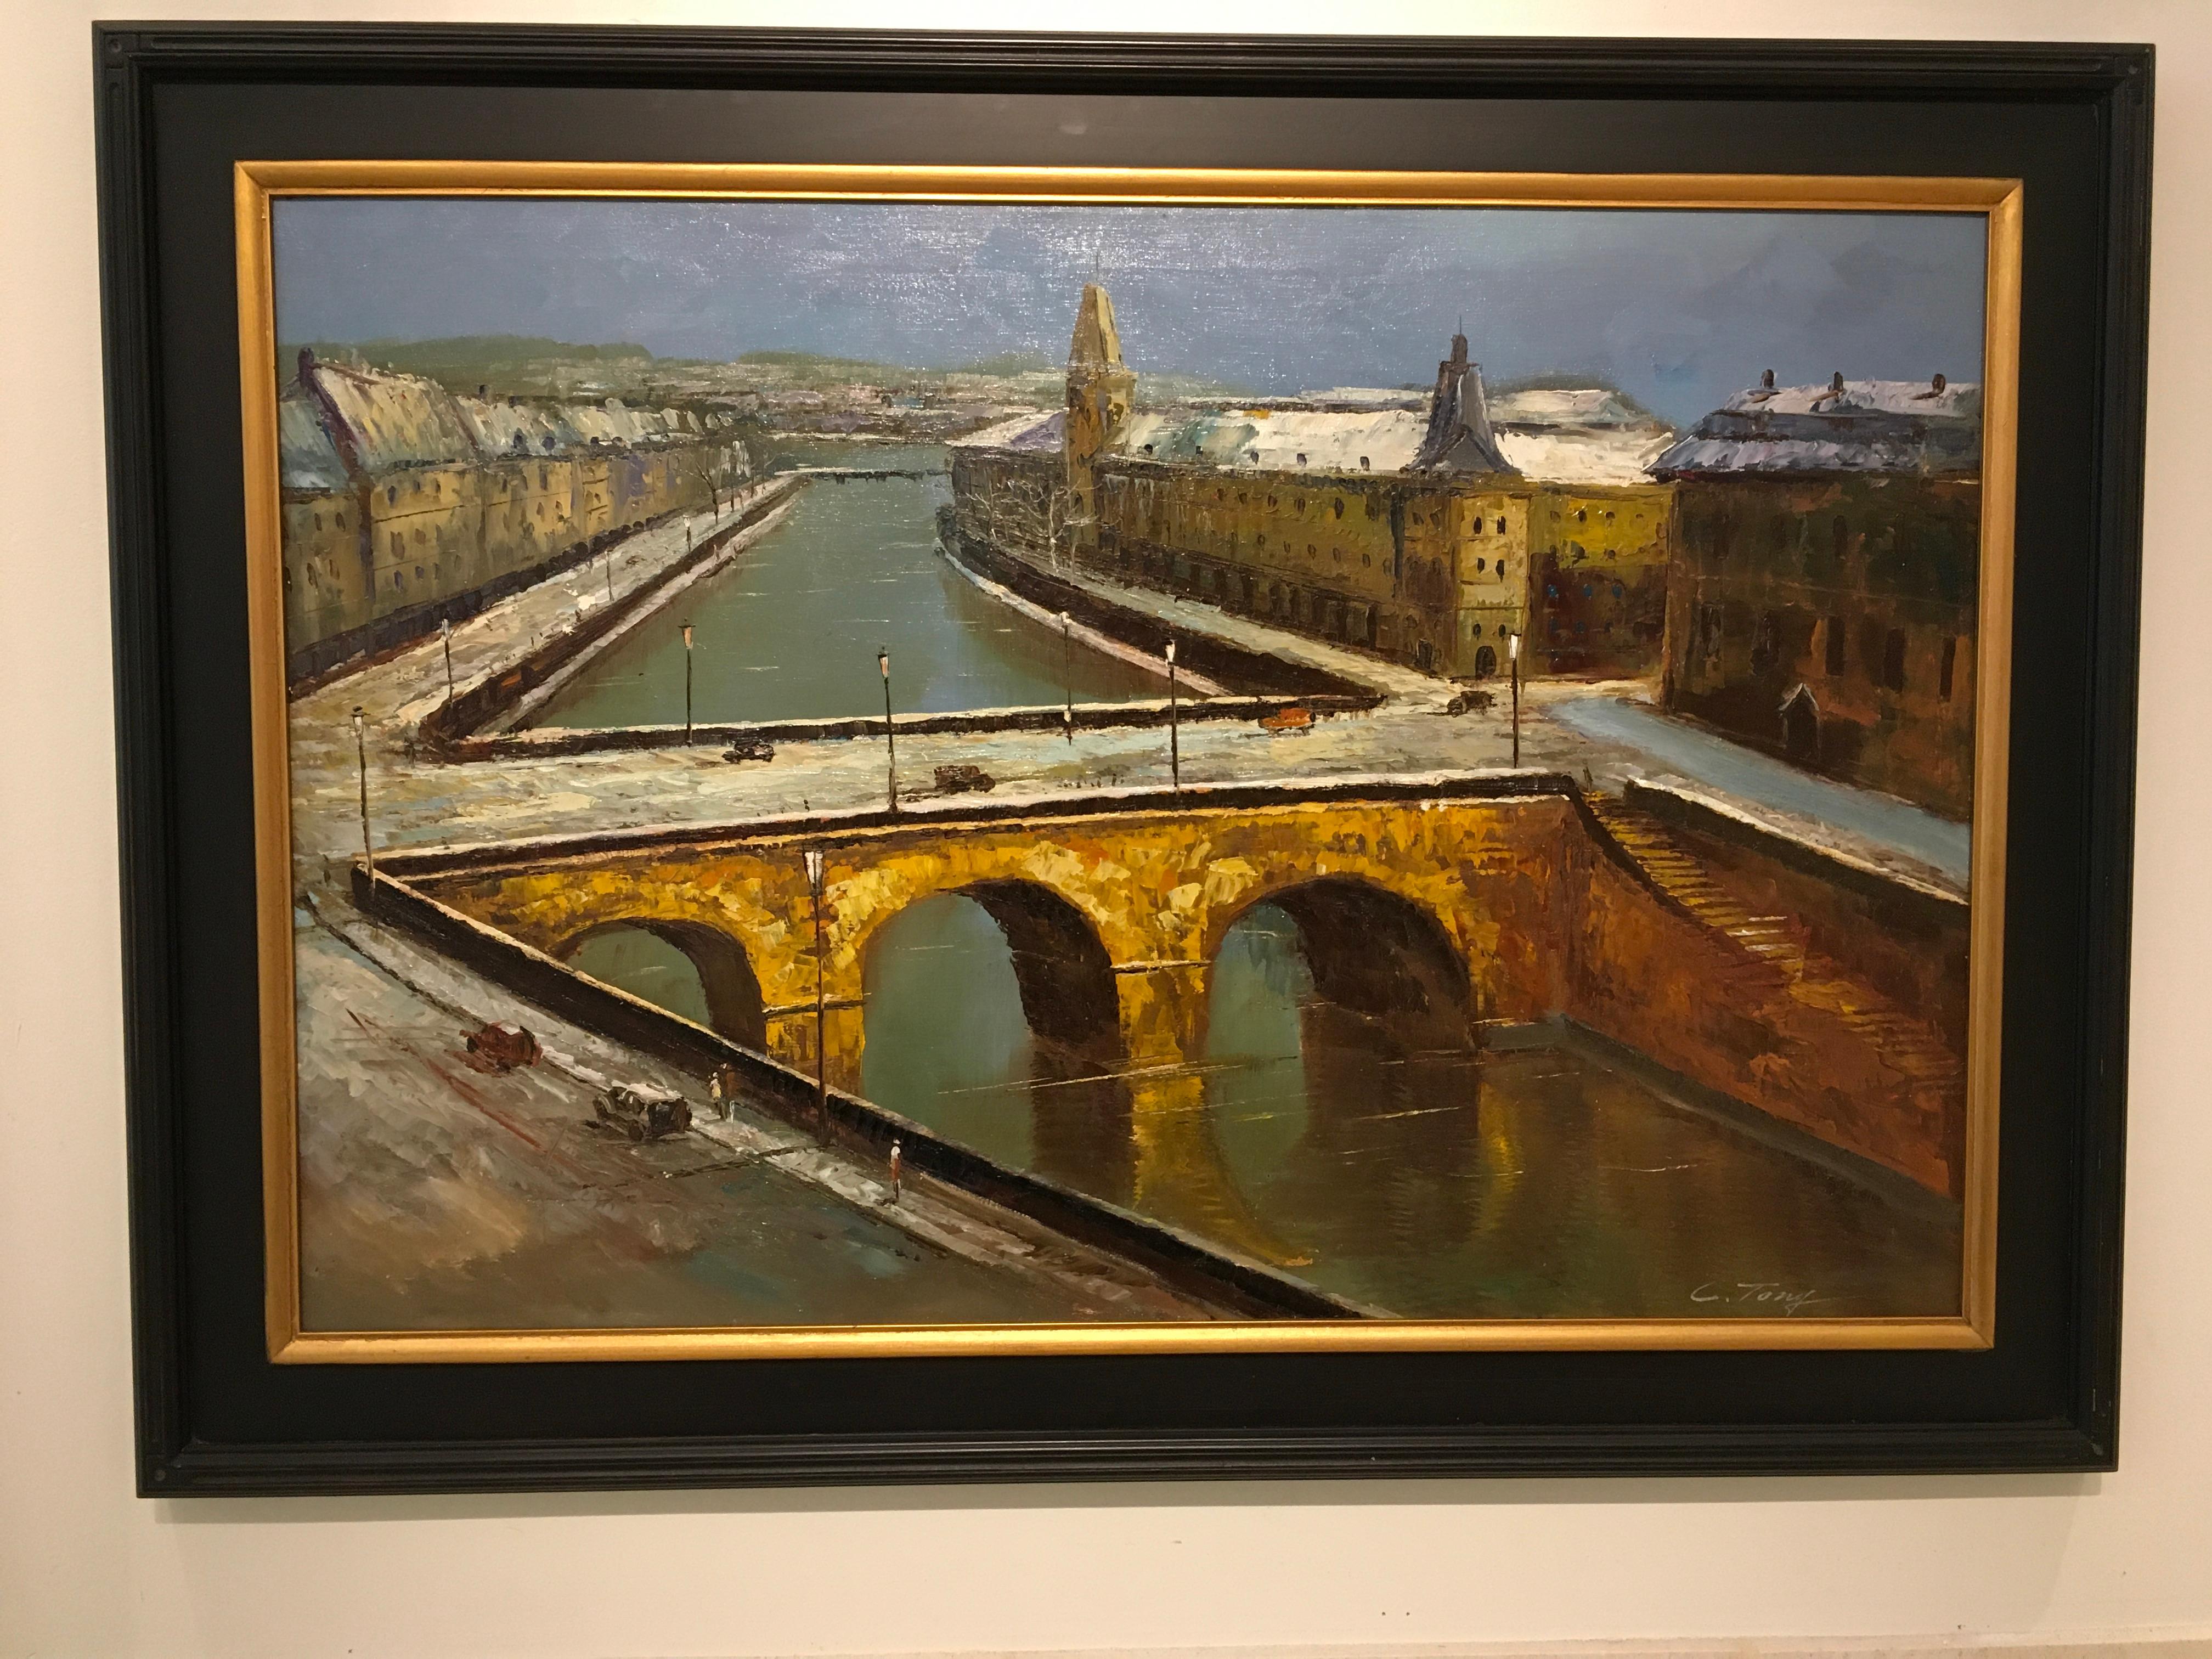 This oil on canvas is a cityscape/landscape depicting a winter scene in Northern France by the Seine River. The artist uses a color palette of gold, grey, and muted blue and green. The river starts in the foreground from the bottom right and flows